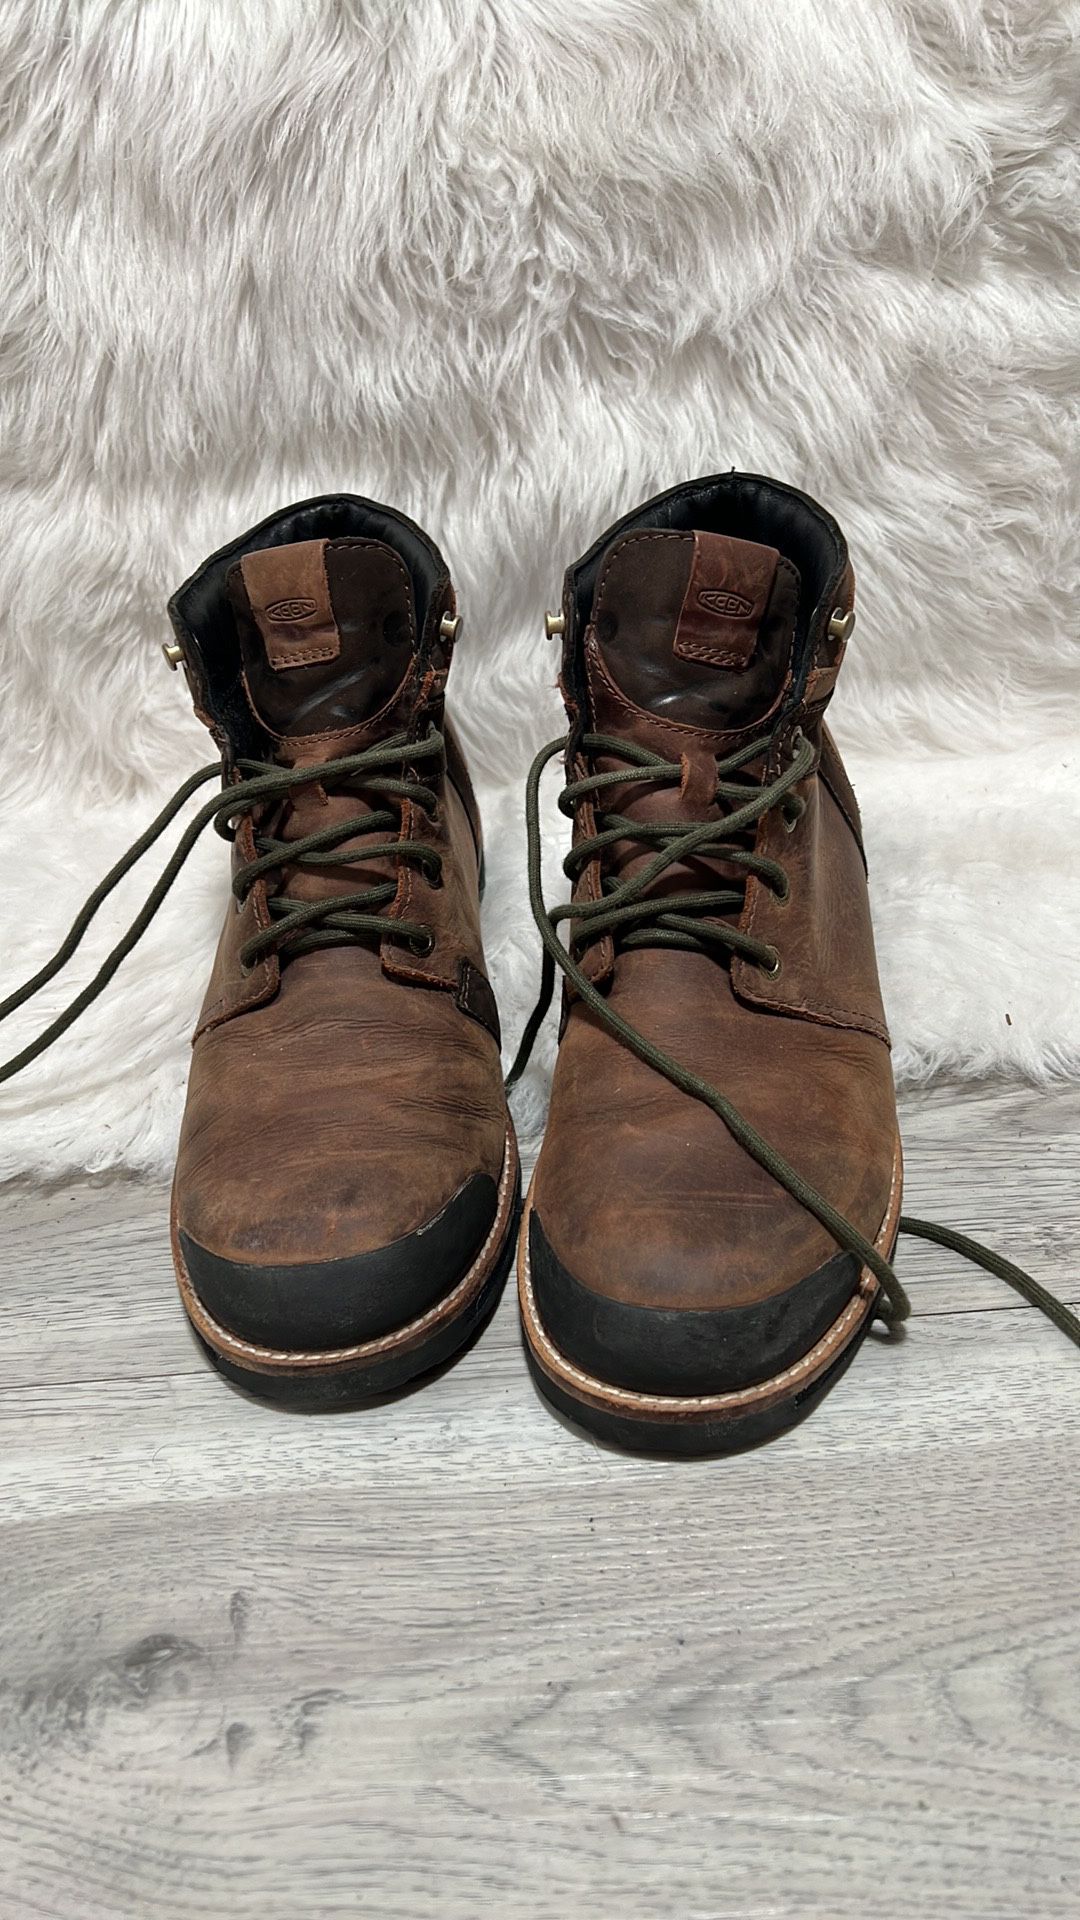 Keen Brown Leather Lace Up Hiking Boots size 11 